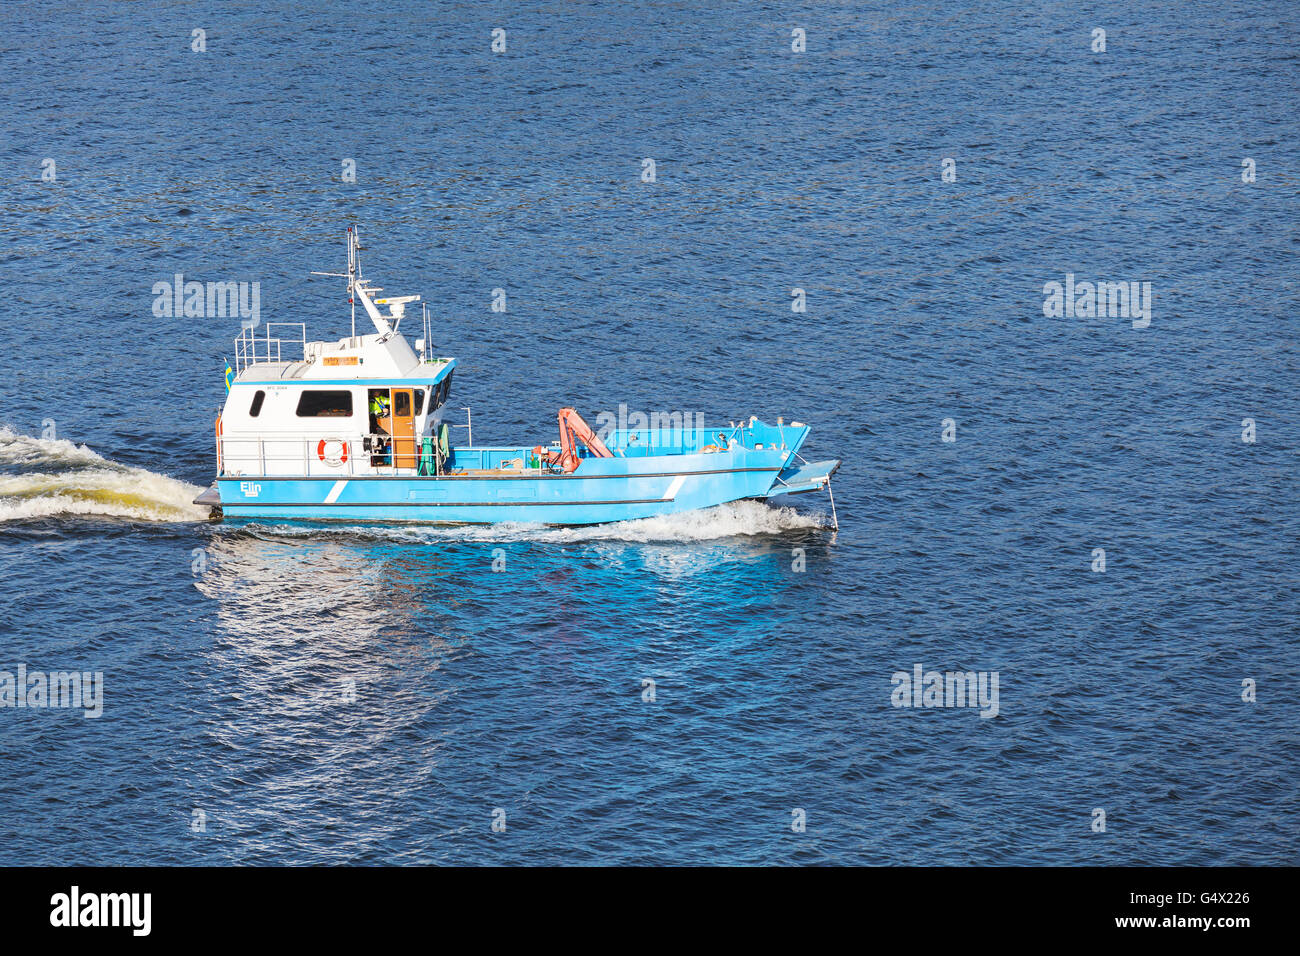 Vaxholm, Sweden - May 6, 2016: Small blue cargo boat goes on Baltic Sea Stock Photo